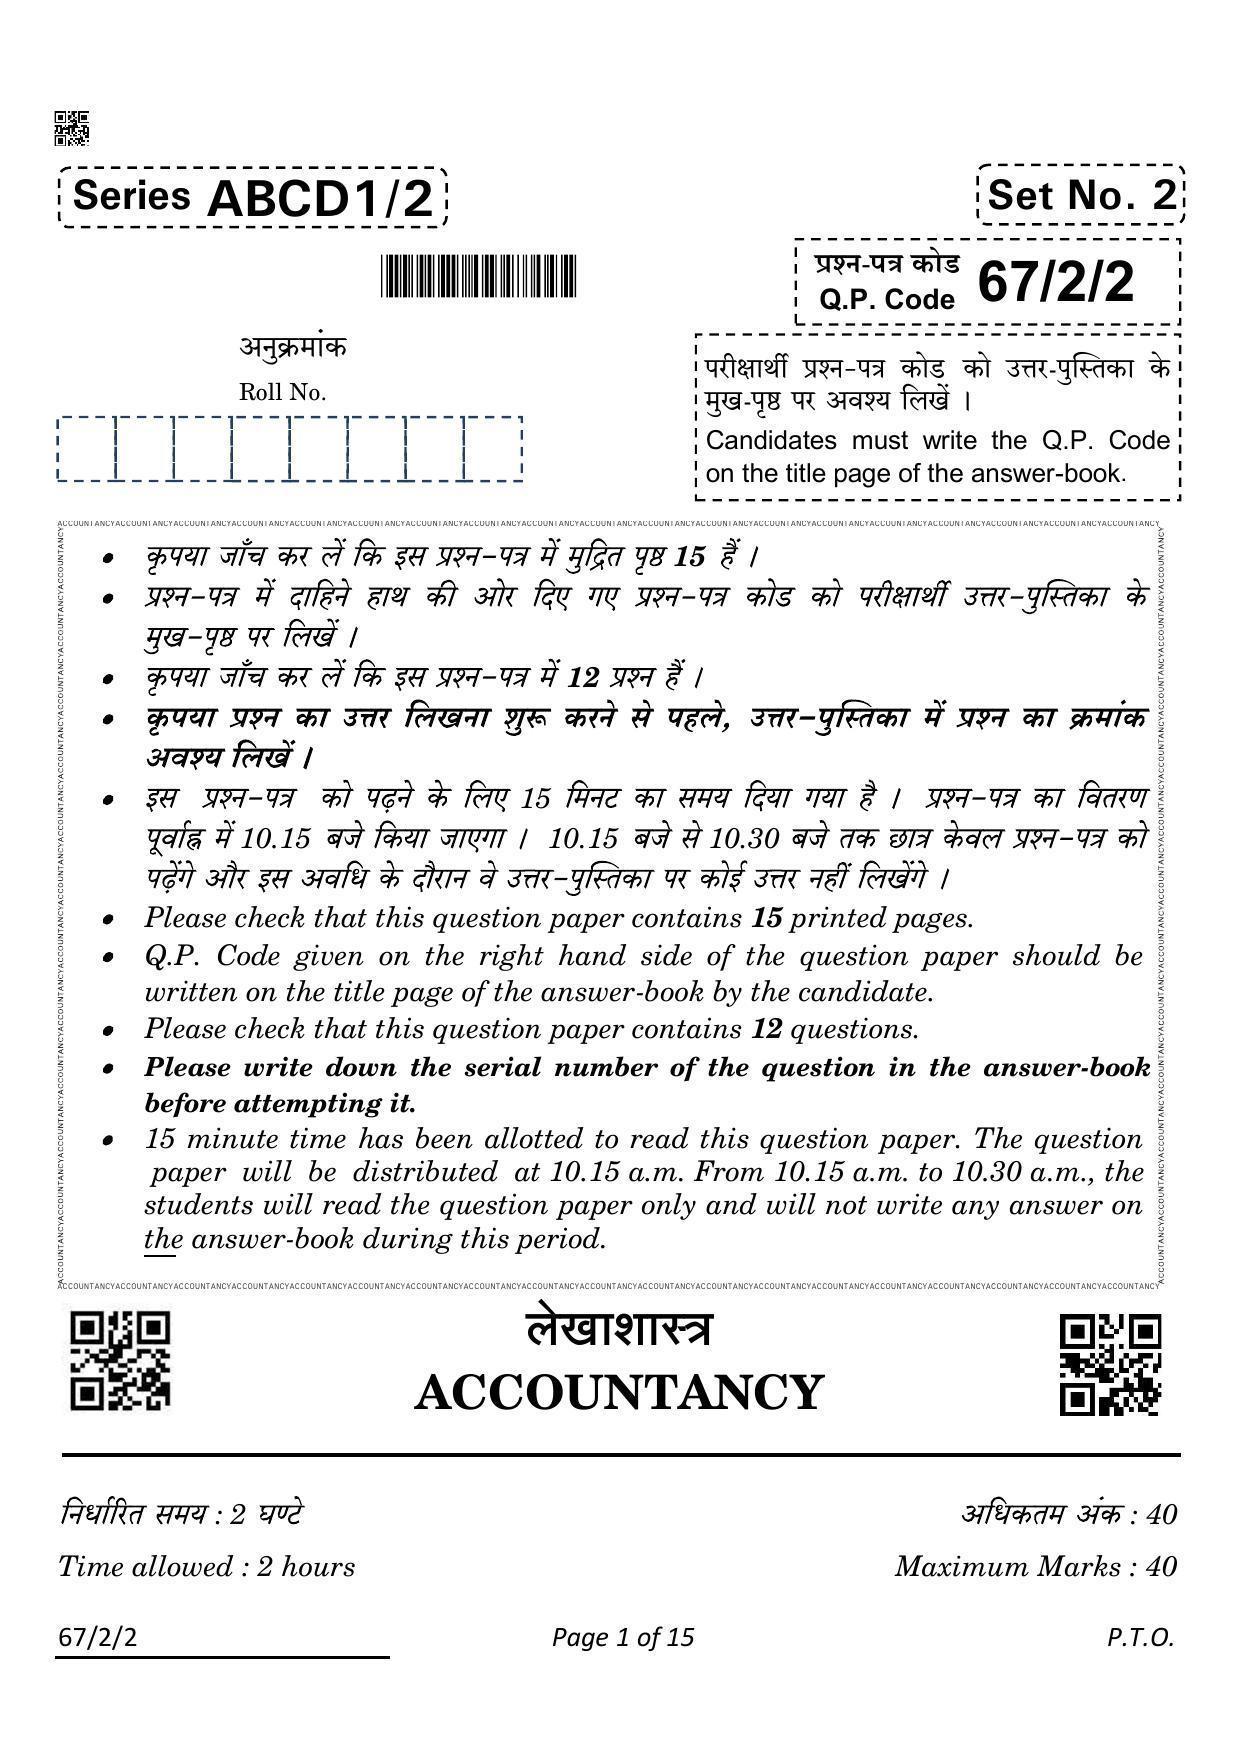 CBSE Class 12 67-2-2 Accountancy 2022 Question Paper - Page 1